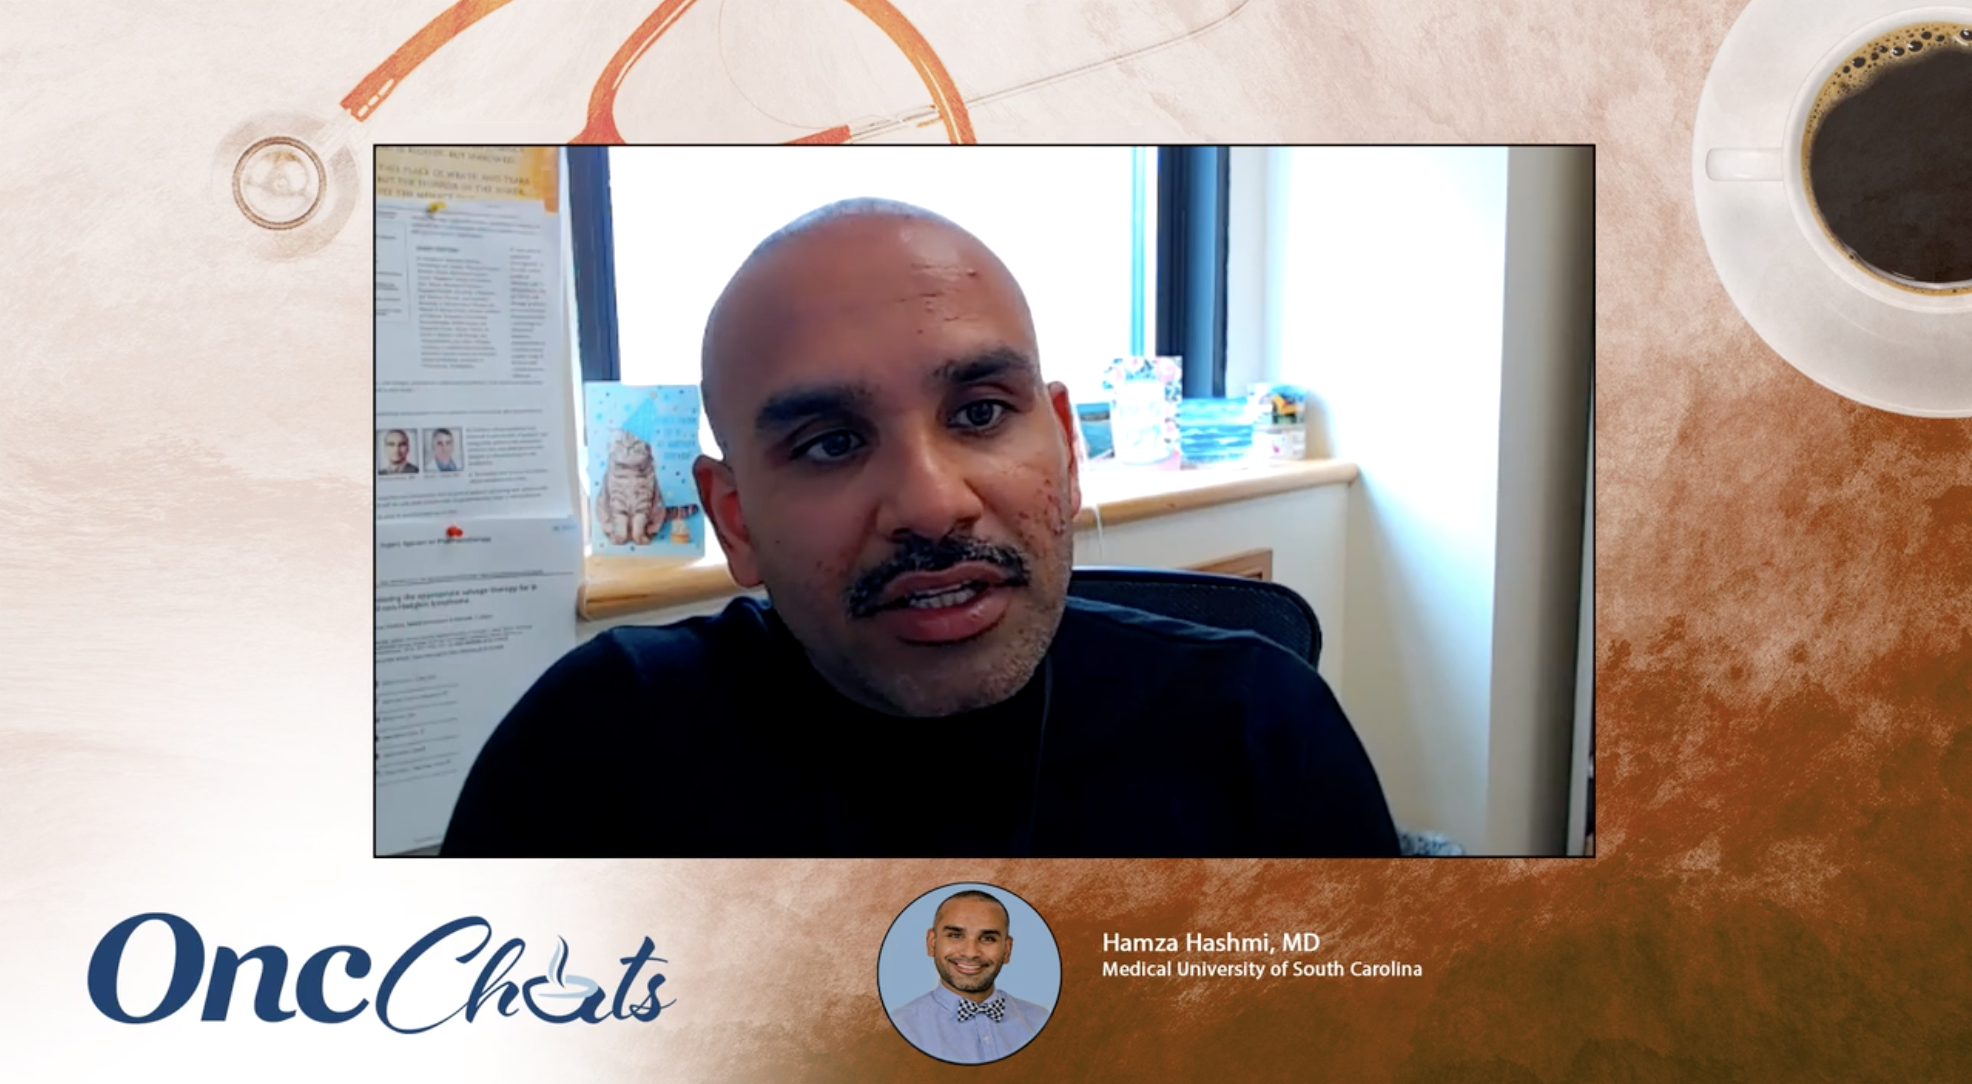 In this fifth episode of OncChats: Unpacking Data From Pivotal Trials in Multiple Myeloma, Hamza Hashmi, MD, reviews the implications of up-front vs delayed transplant on survival, quality of life, and risk of secondary malignancies in newly diagnosed, multiple myeloma.